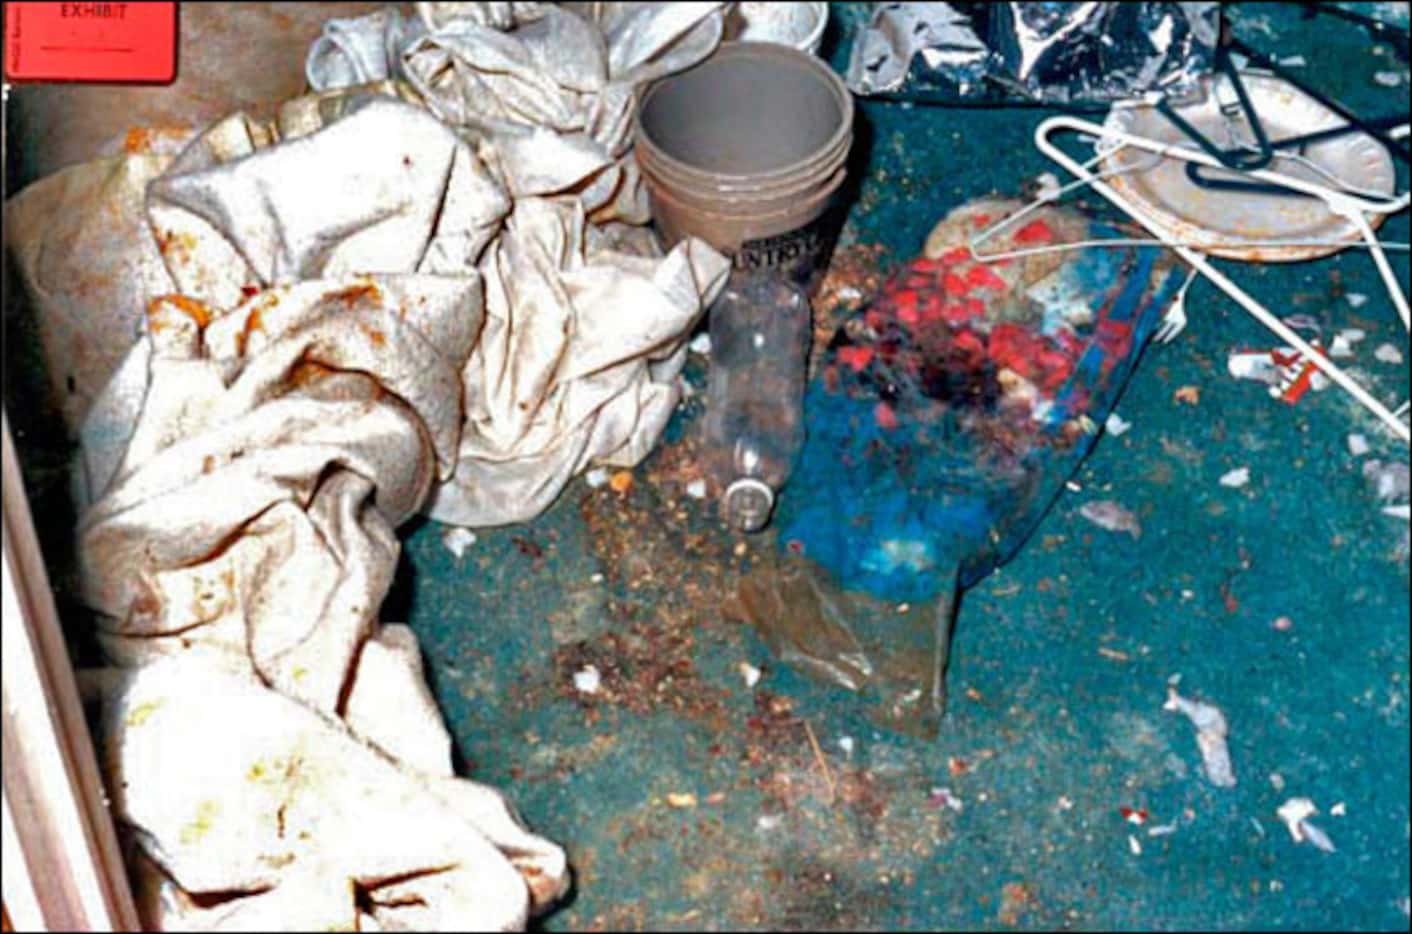 Several days after Lauren's rescue in June 2001, authorities took this photo of the closet...